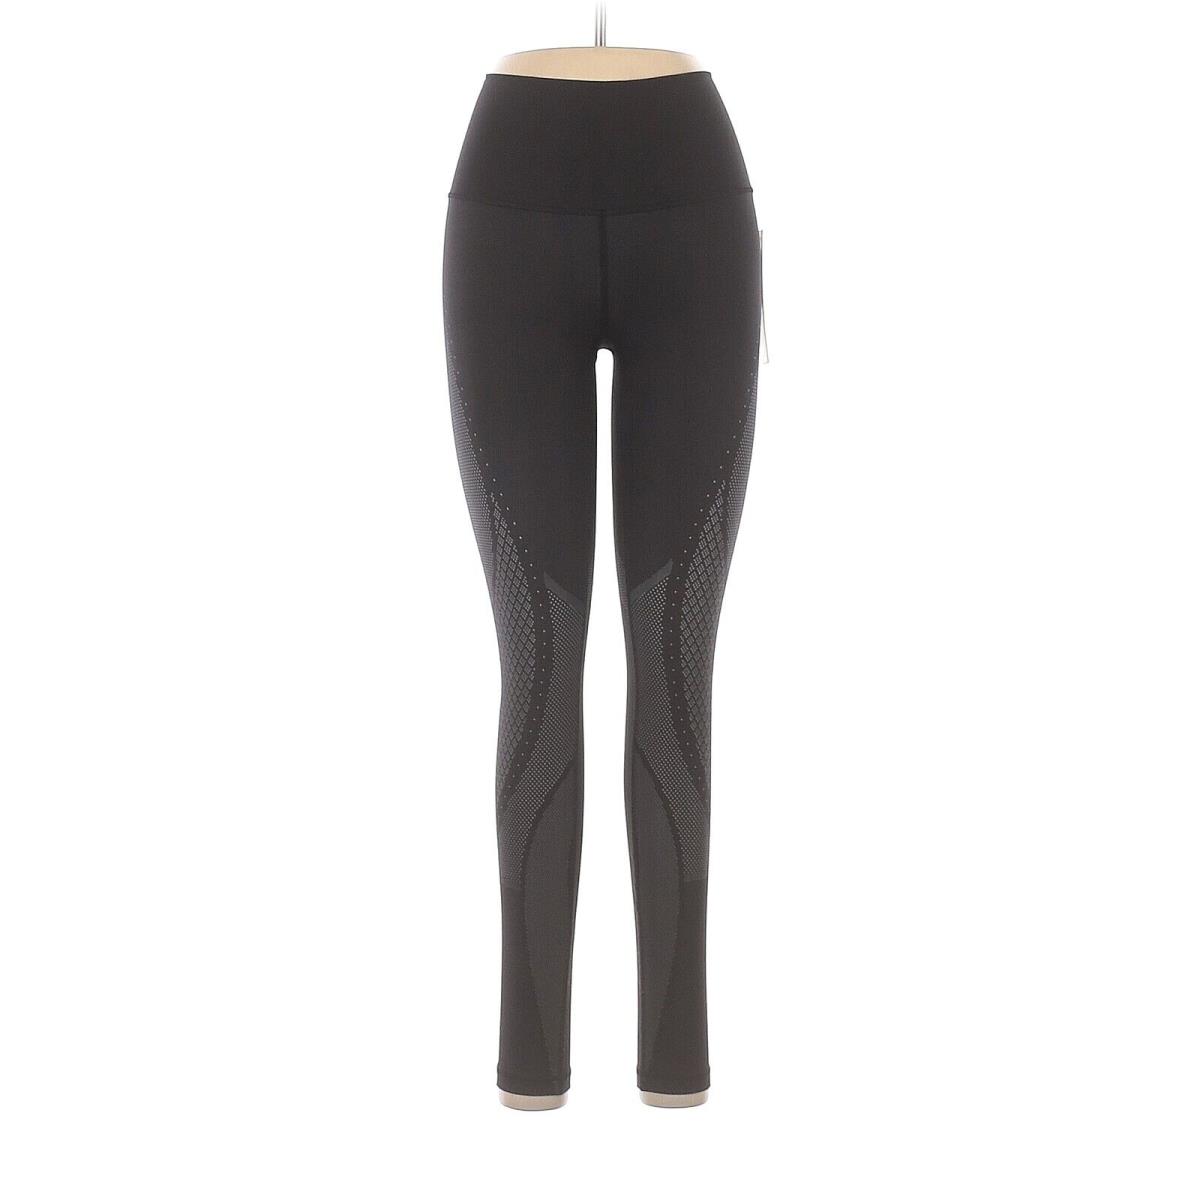 Lululemon Athletica Black Gray Mapped Out High-rise Tight 28 Leggings - US 6